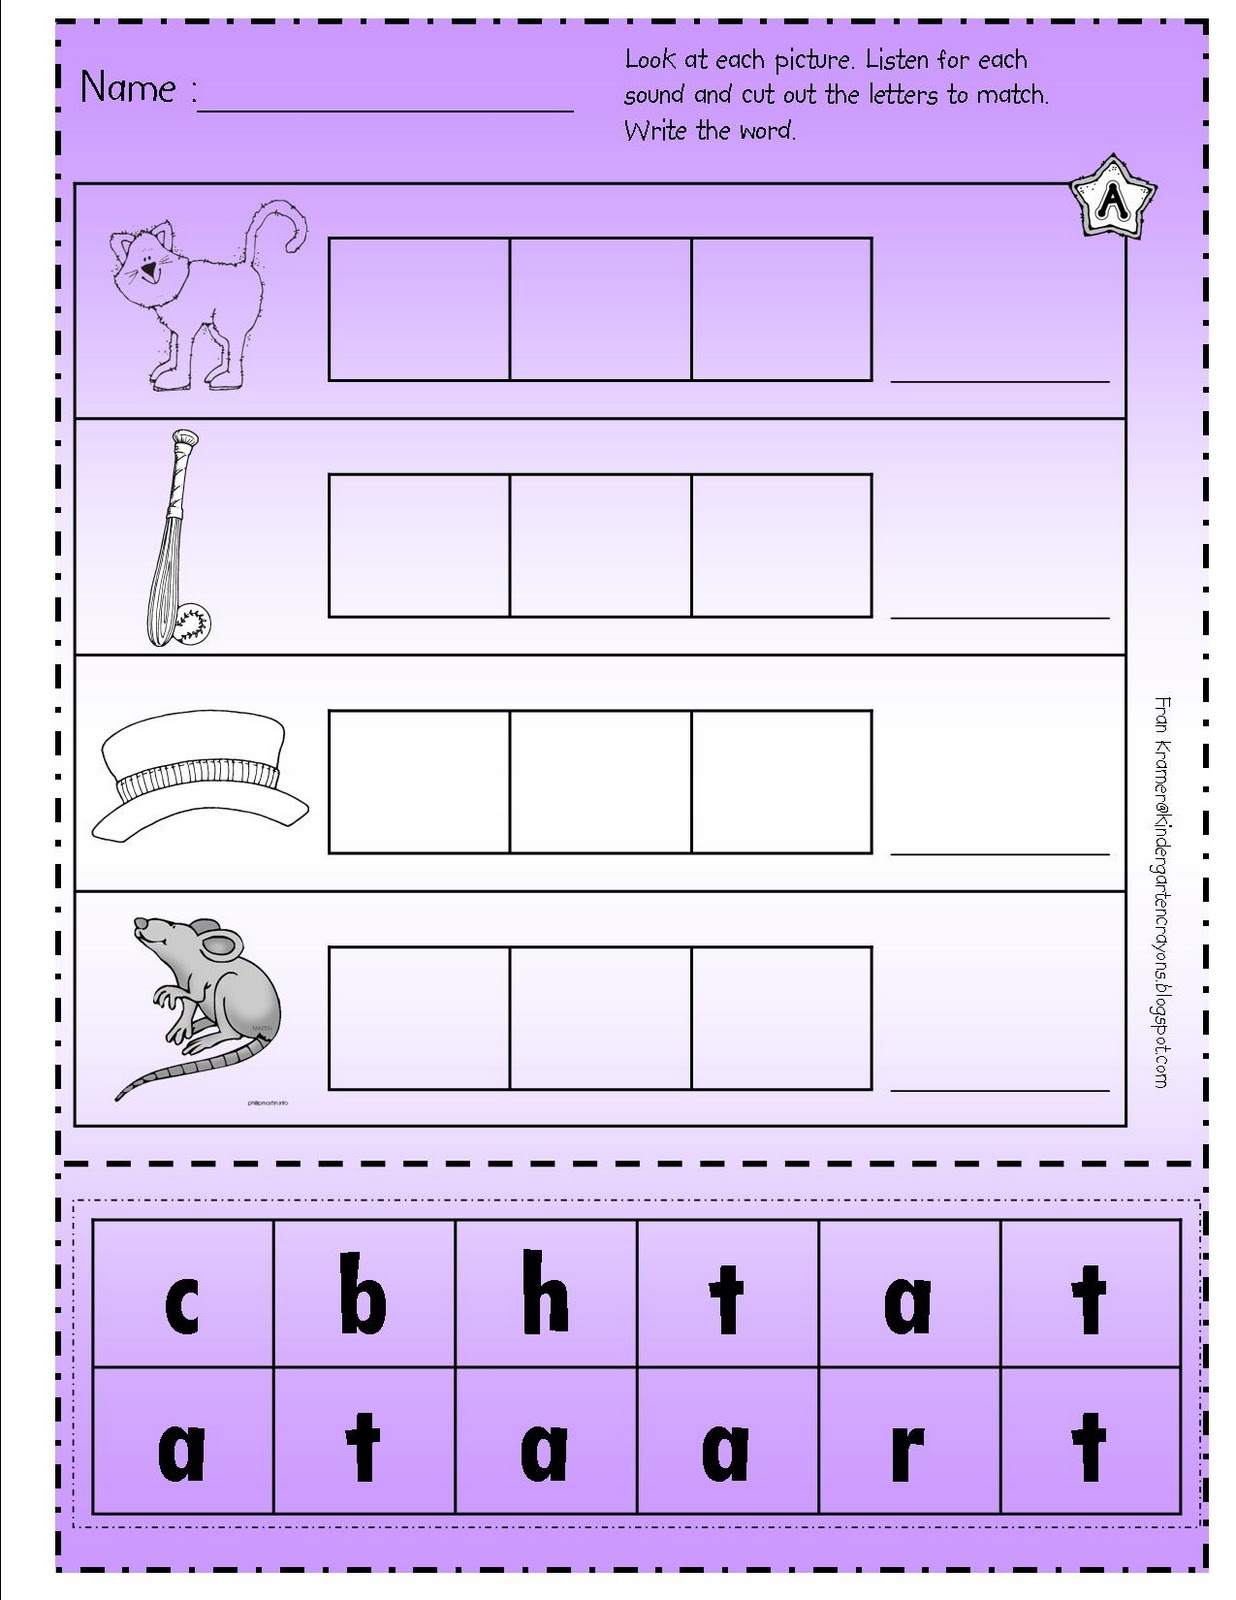 cut-and-paste-cvc-words-worksheets